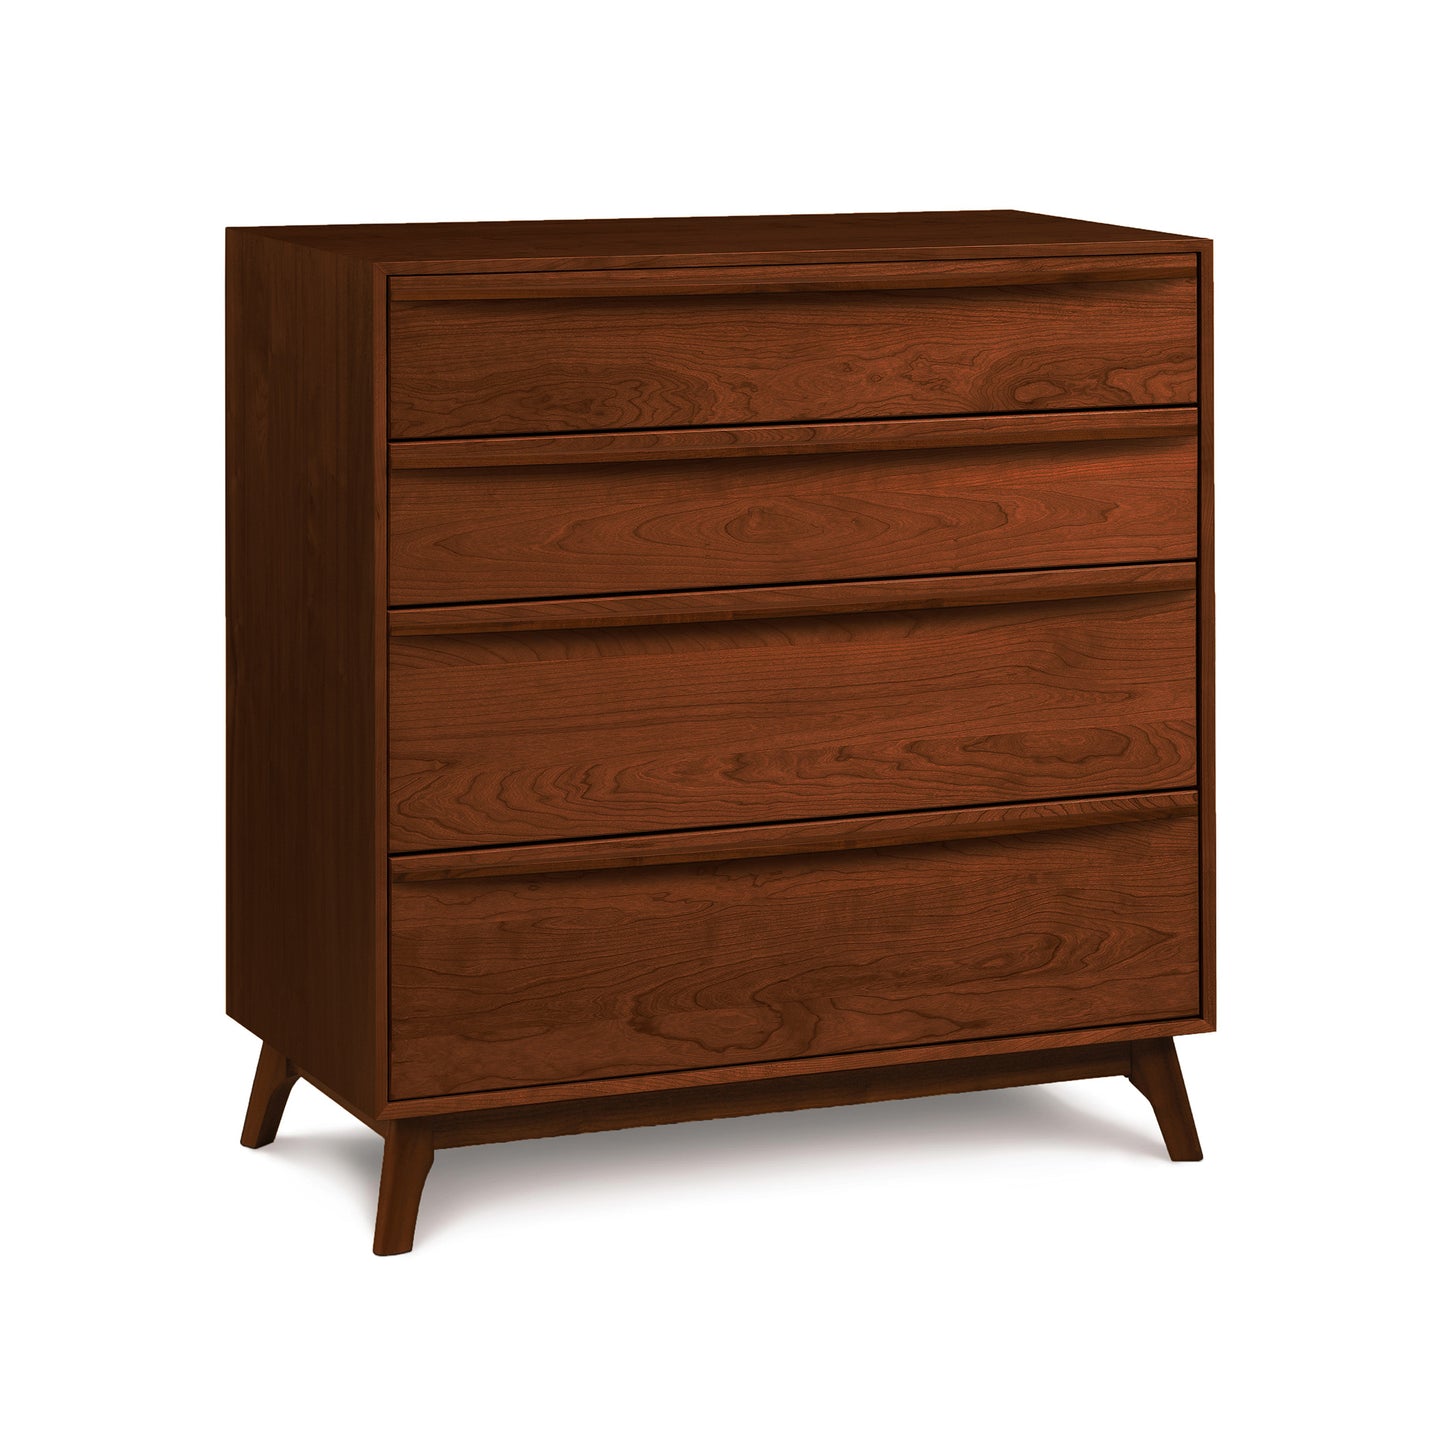 A modern Copeland Furniture Catalina 4-Drawer Chest, handmade in Vermont, in a dark brown color.